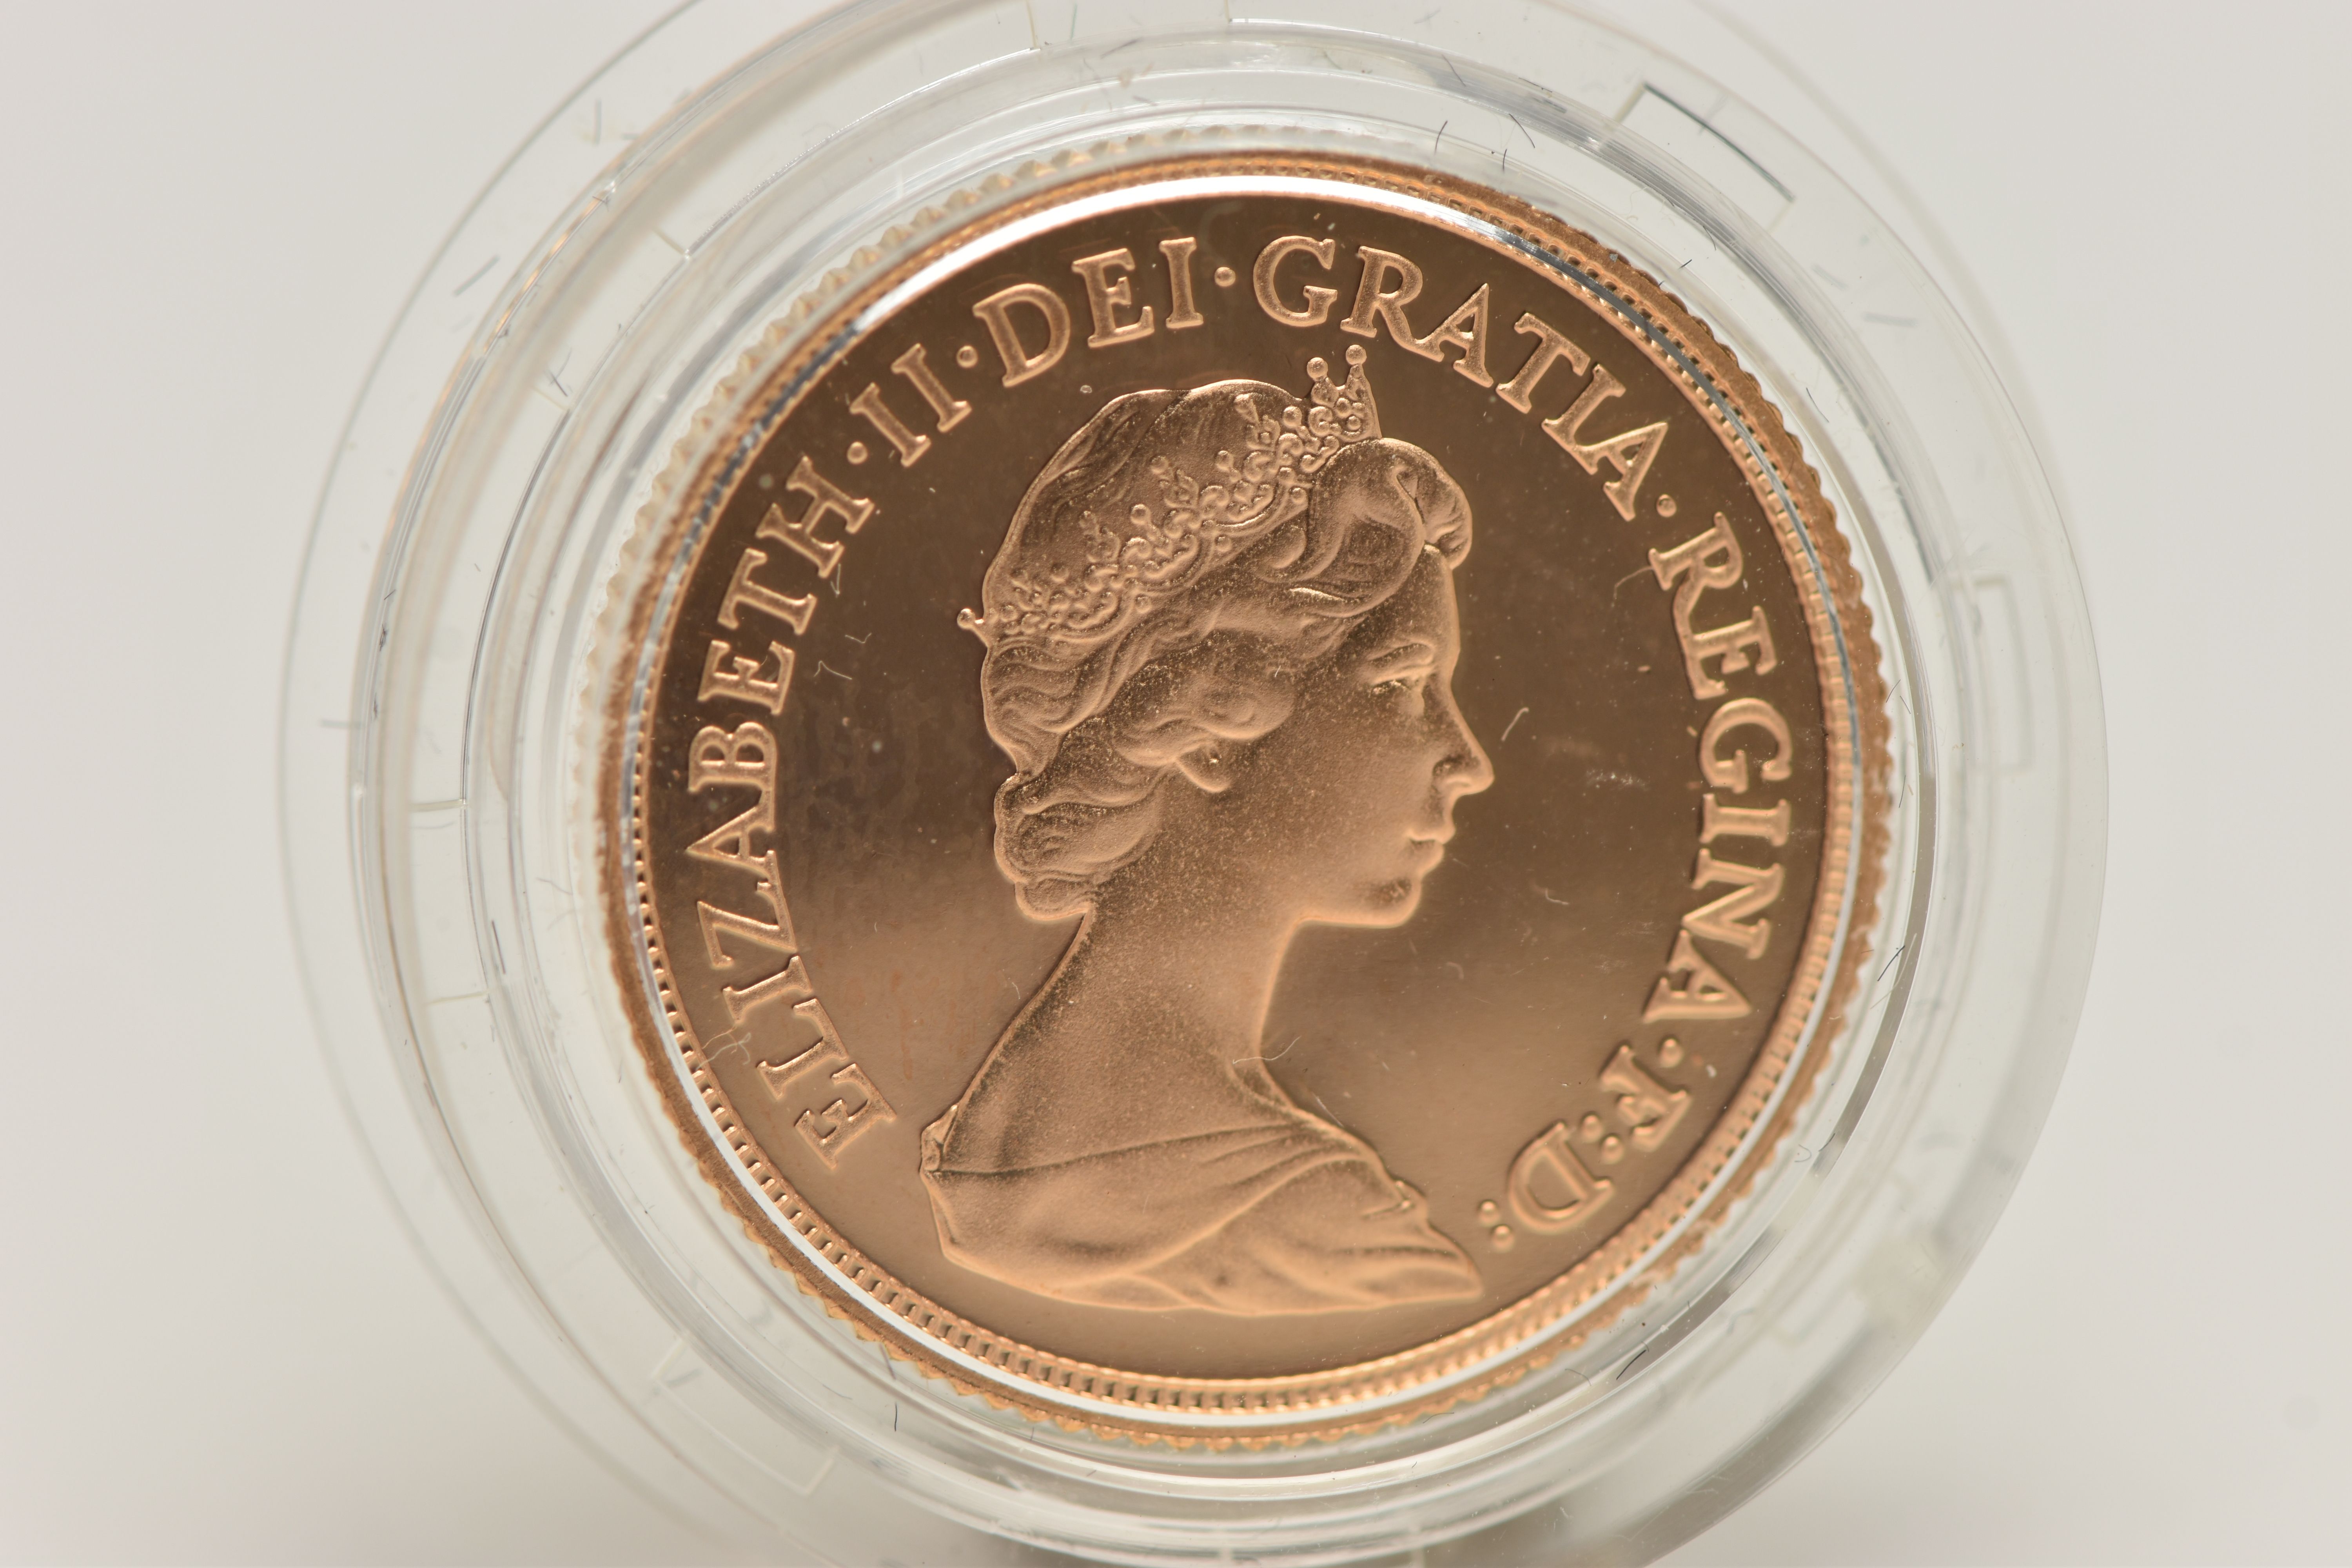 ROYAL MINT FULL GOLD PROOF SOVEREIGN COIN QUEEN ELIZABETH II 1982, .916 fine, 7.98 gram, 22.05mm - Image 2 of 2